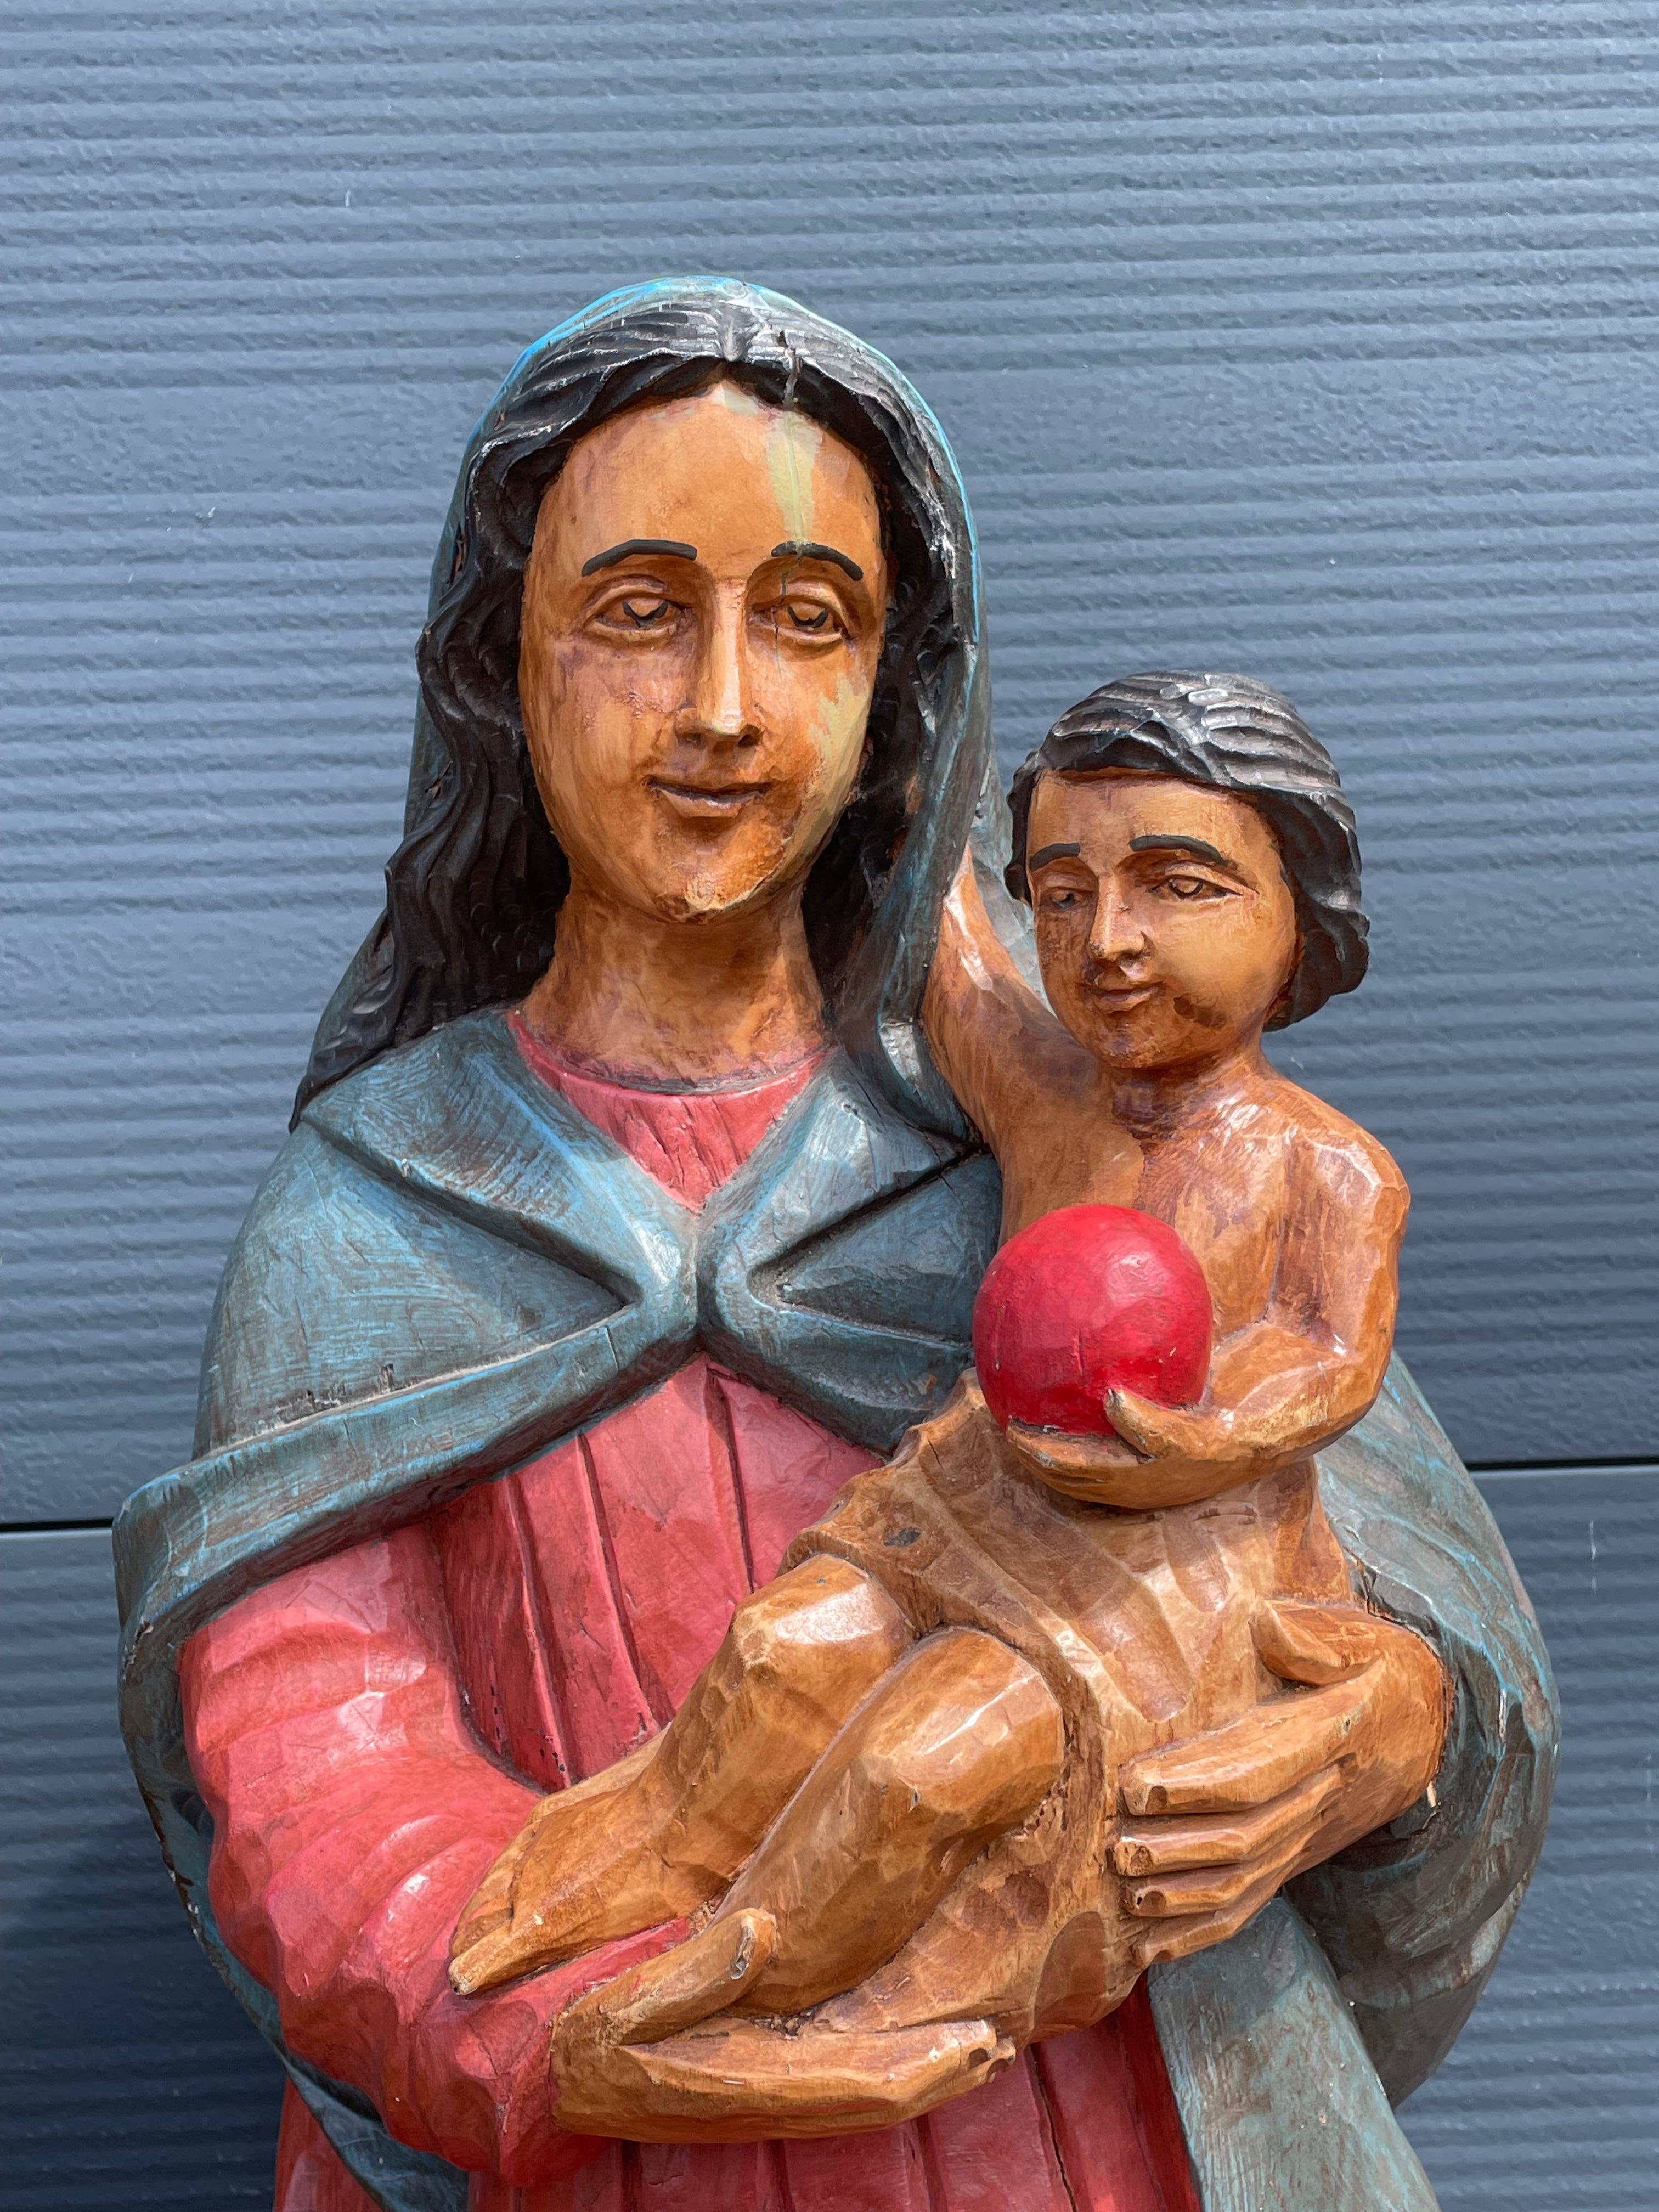 Large Pair of Hand Carved Wooden Mary & Joseph Sculptures, Both with Child Jesus im Angebot 9